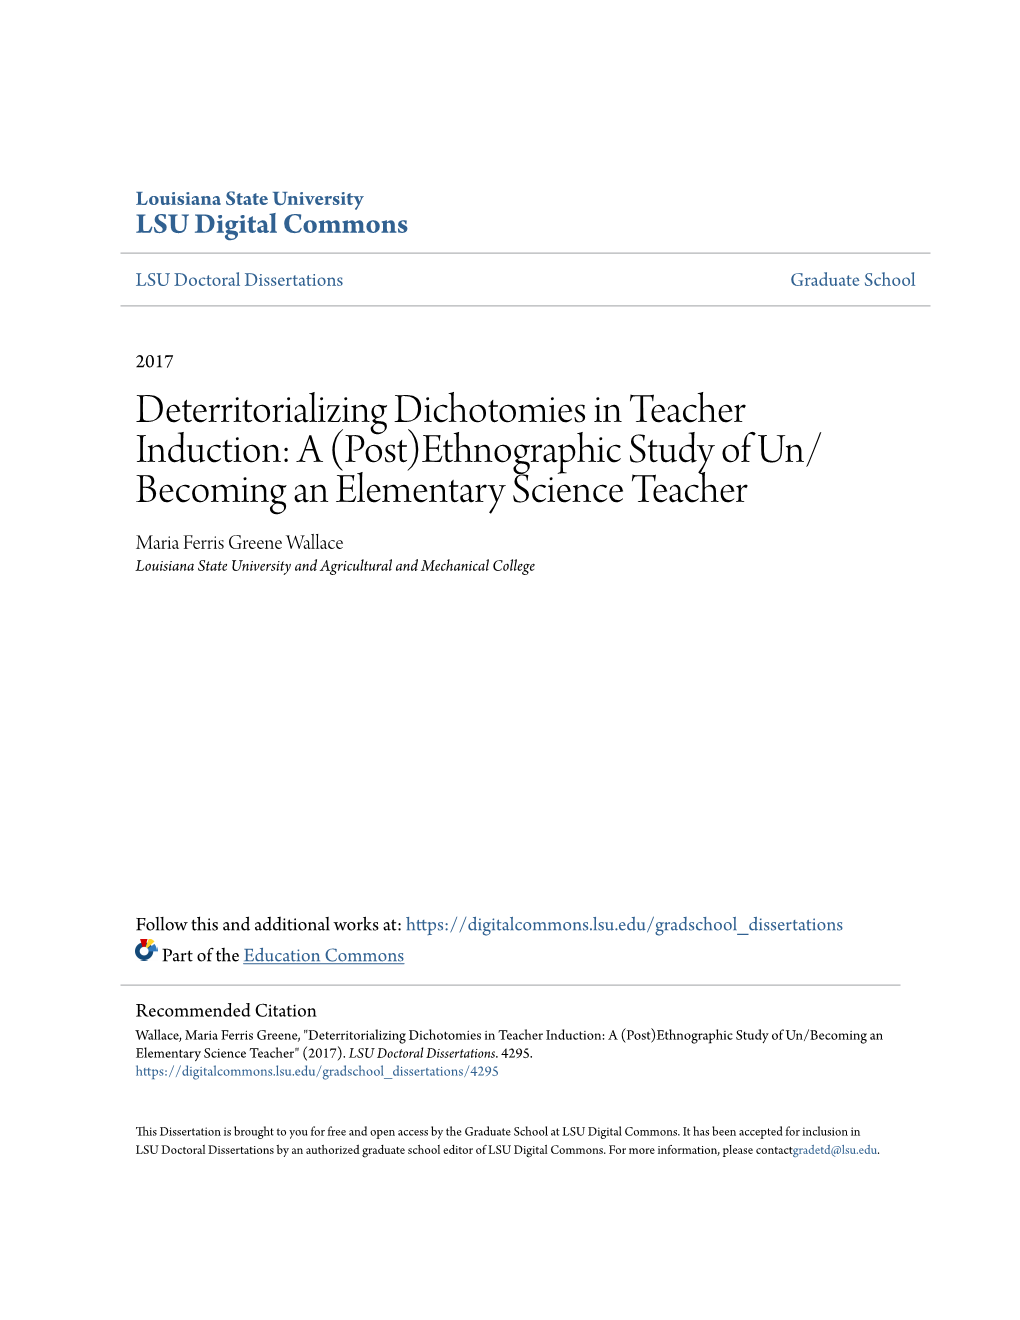 Ethnographic Study of Un/Becoming an Elementary Science Teacher" (2017)